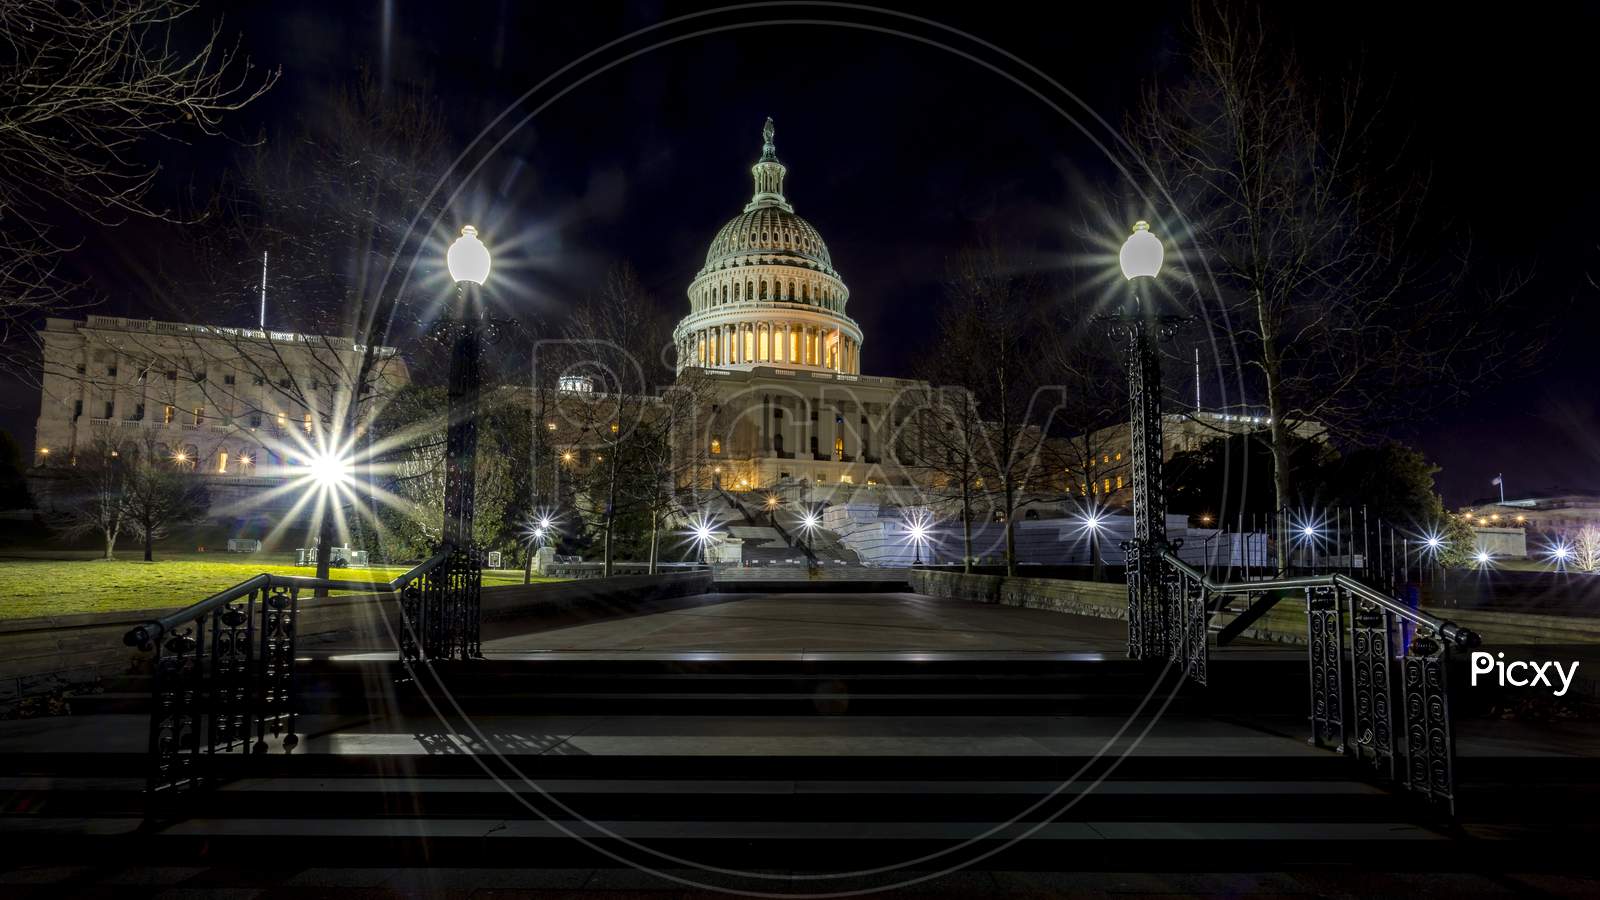 The capitol in Washington D.C., United States of America at a cold night in spring.